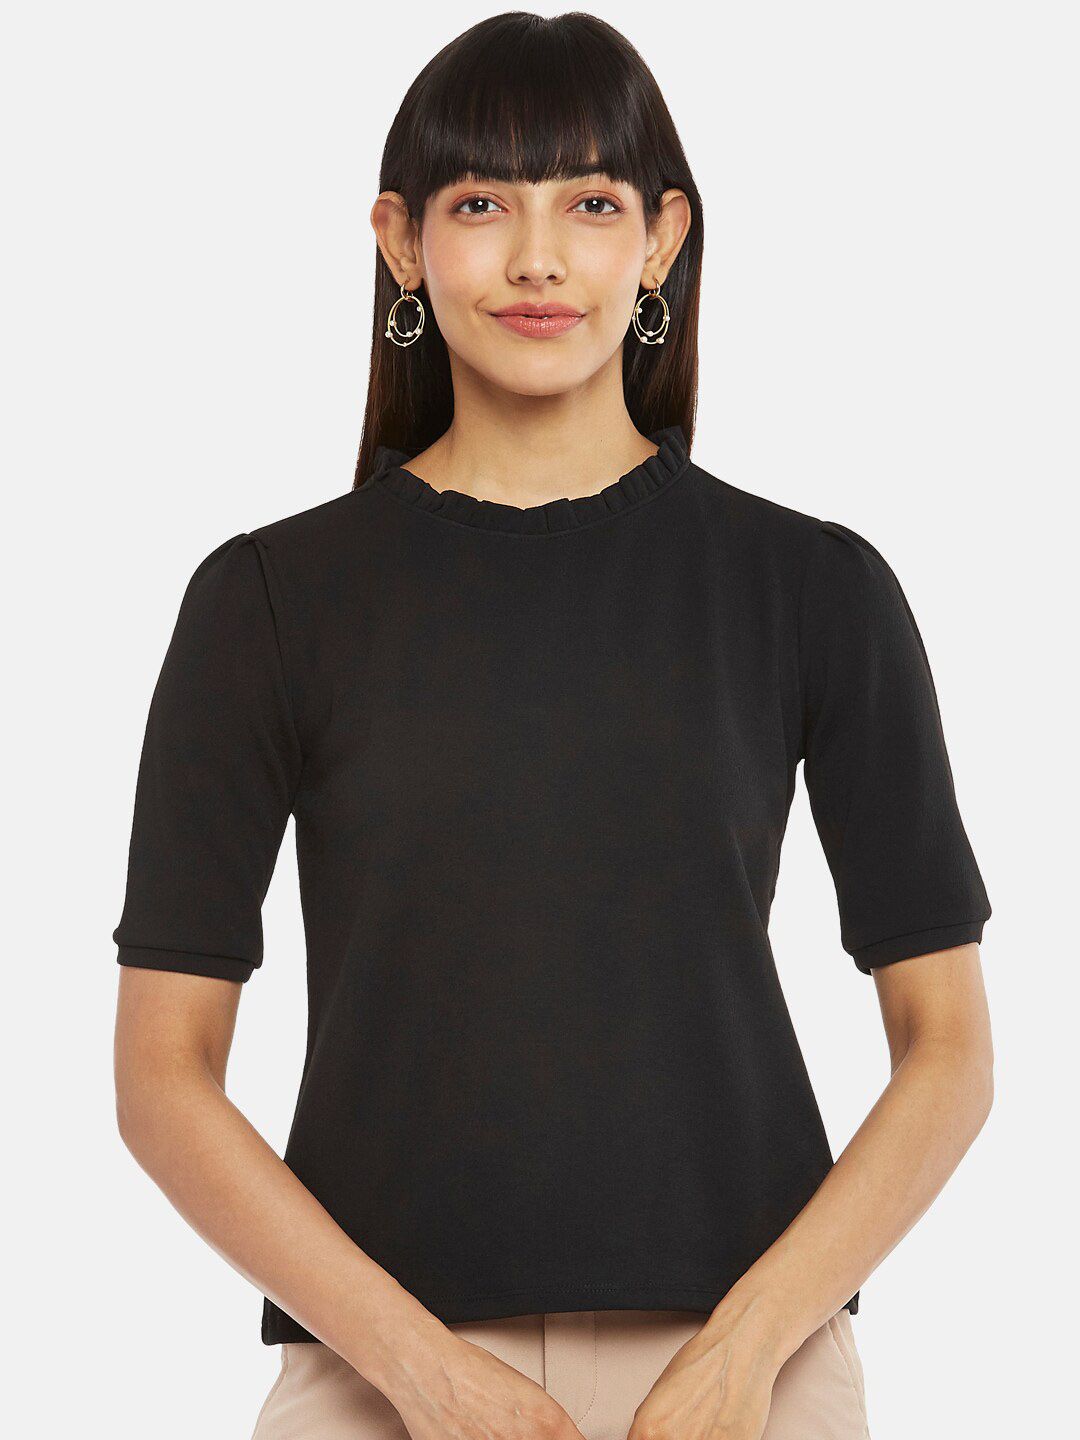 Annabelle by Pantaloons Women Black Top Price in India